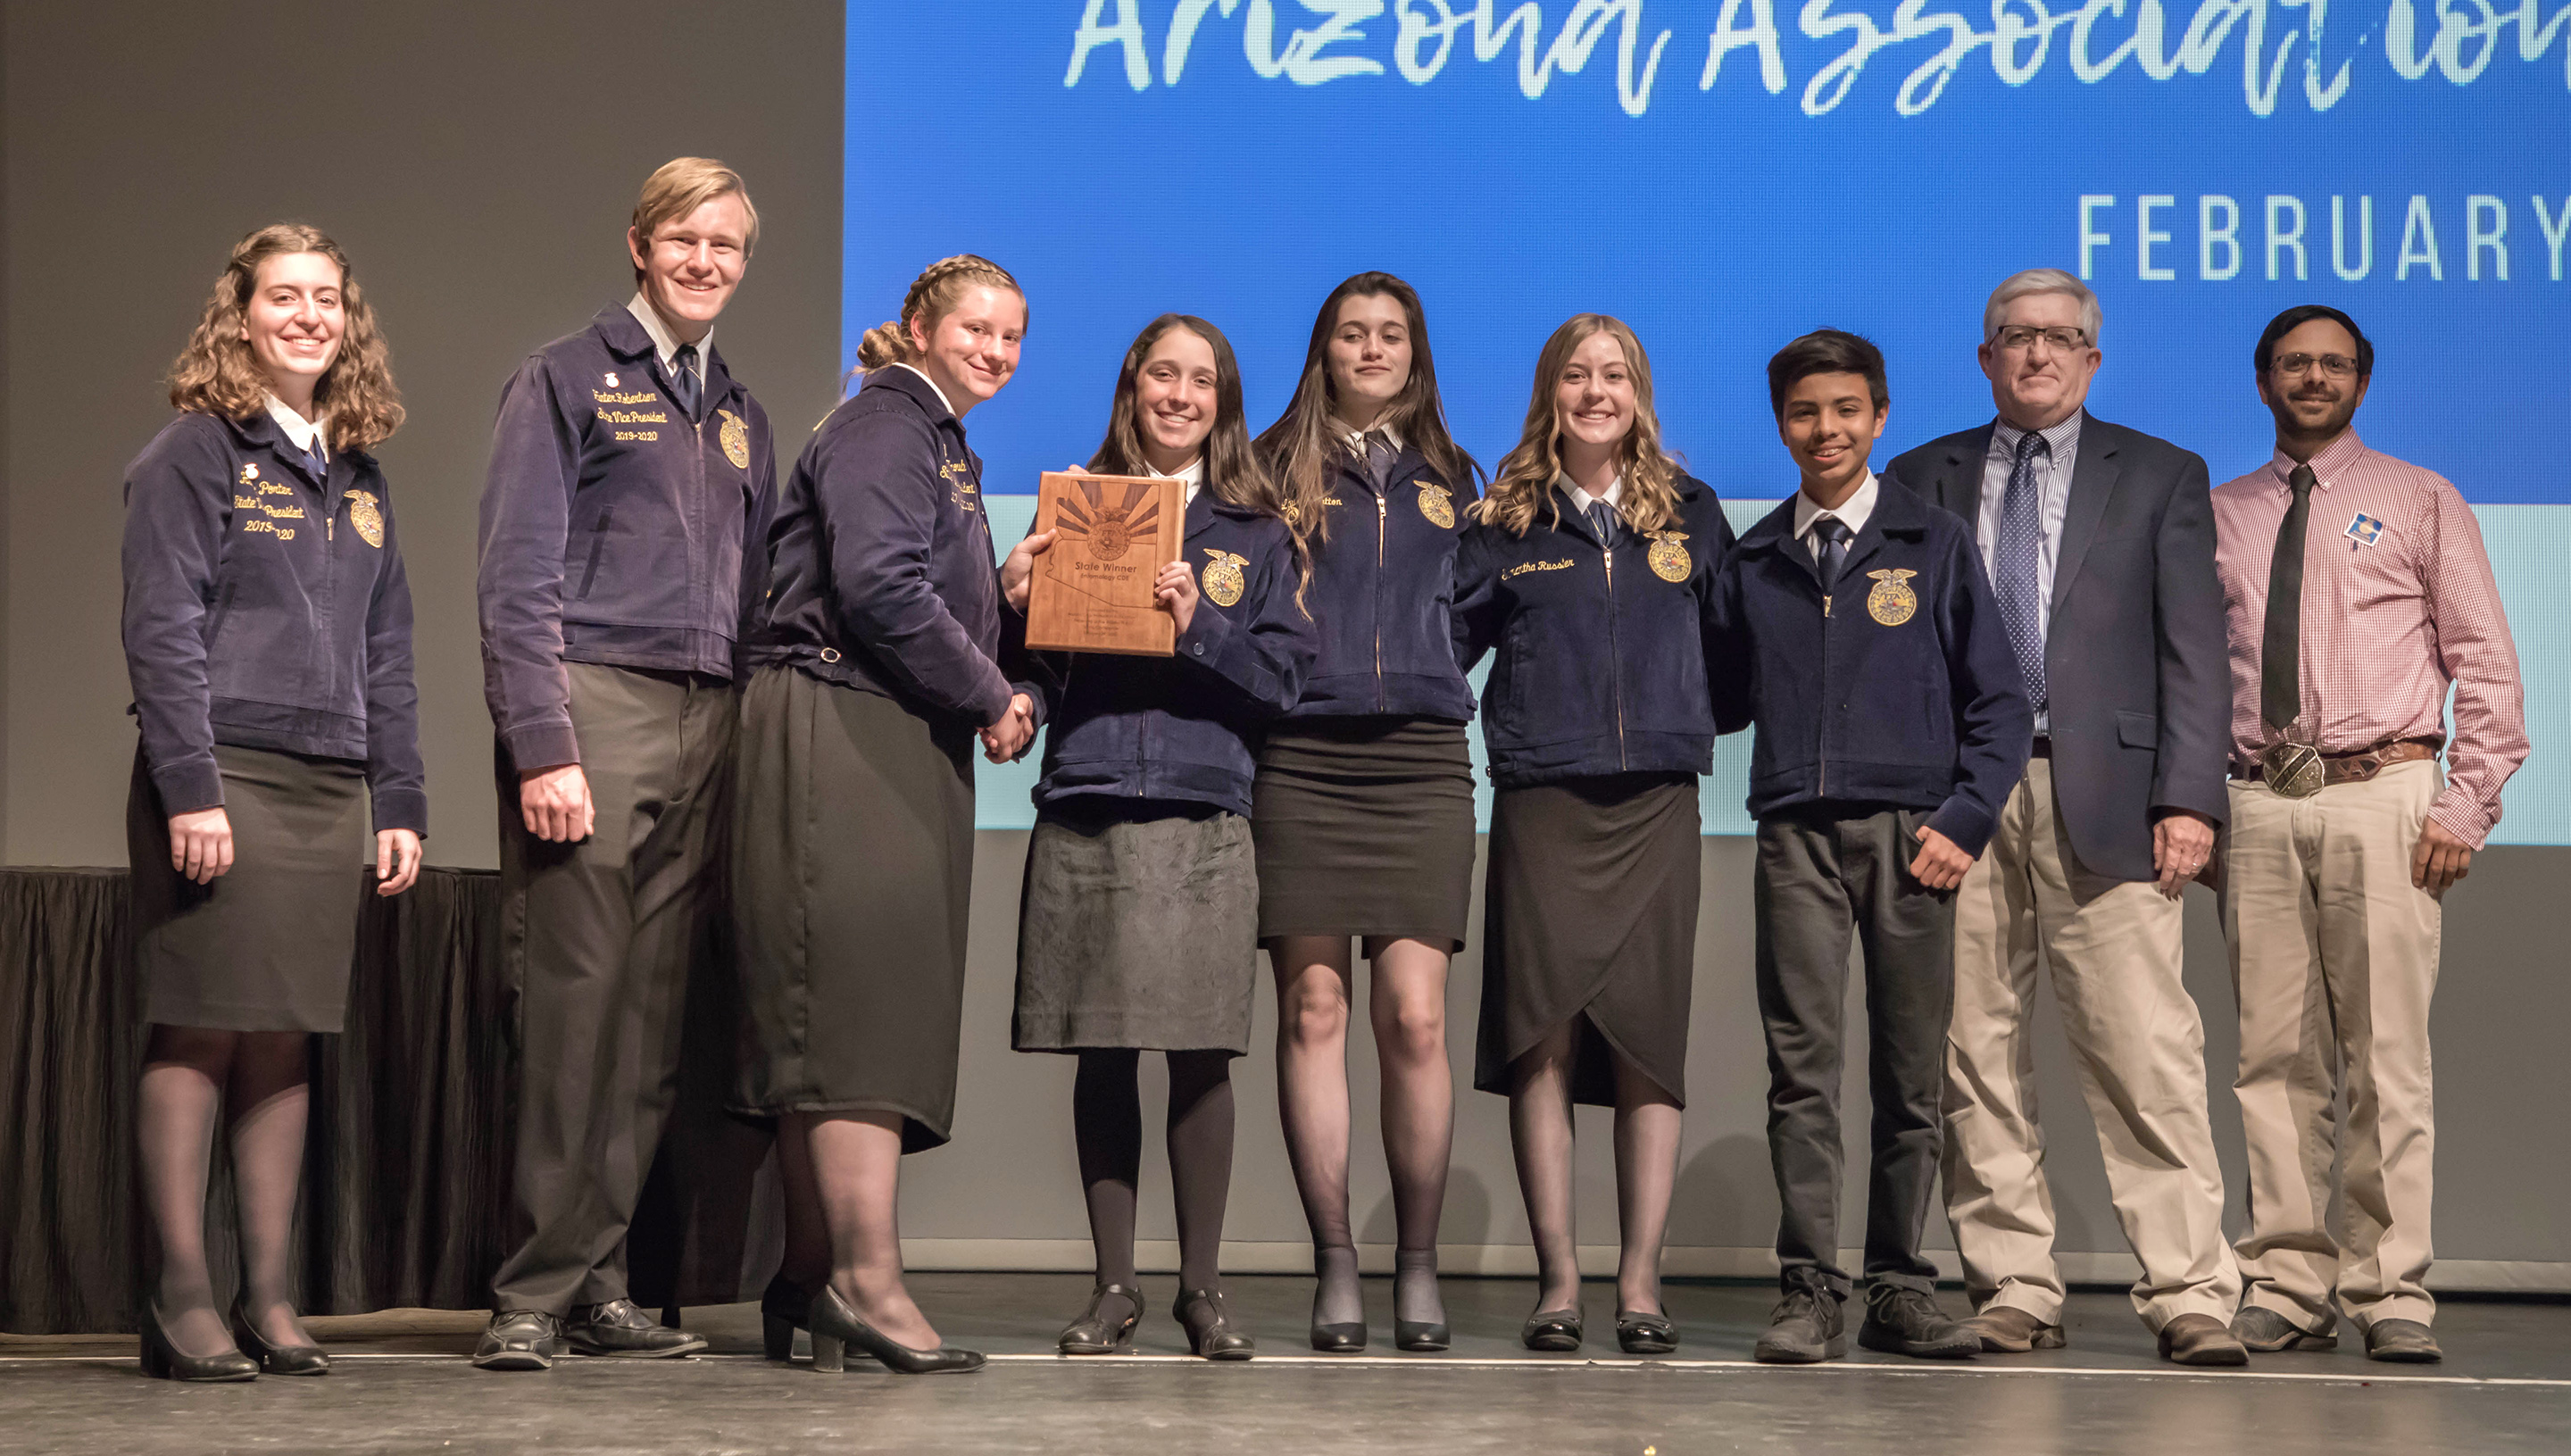 AAECPrescott Valley FFA Chapter takes top honors at career development